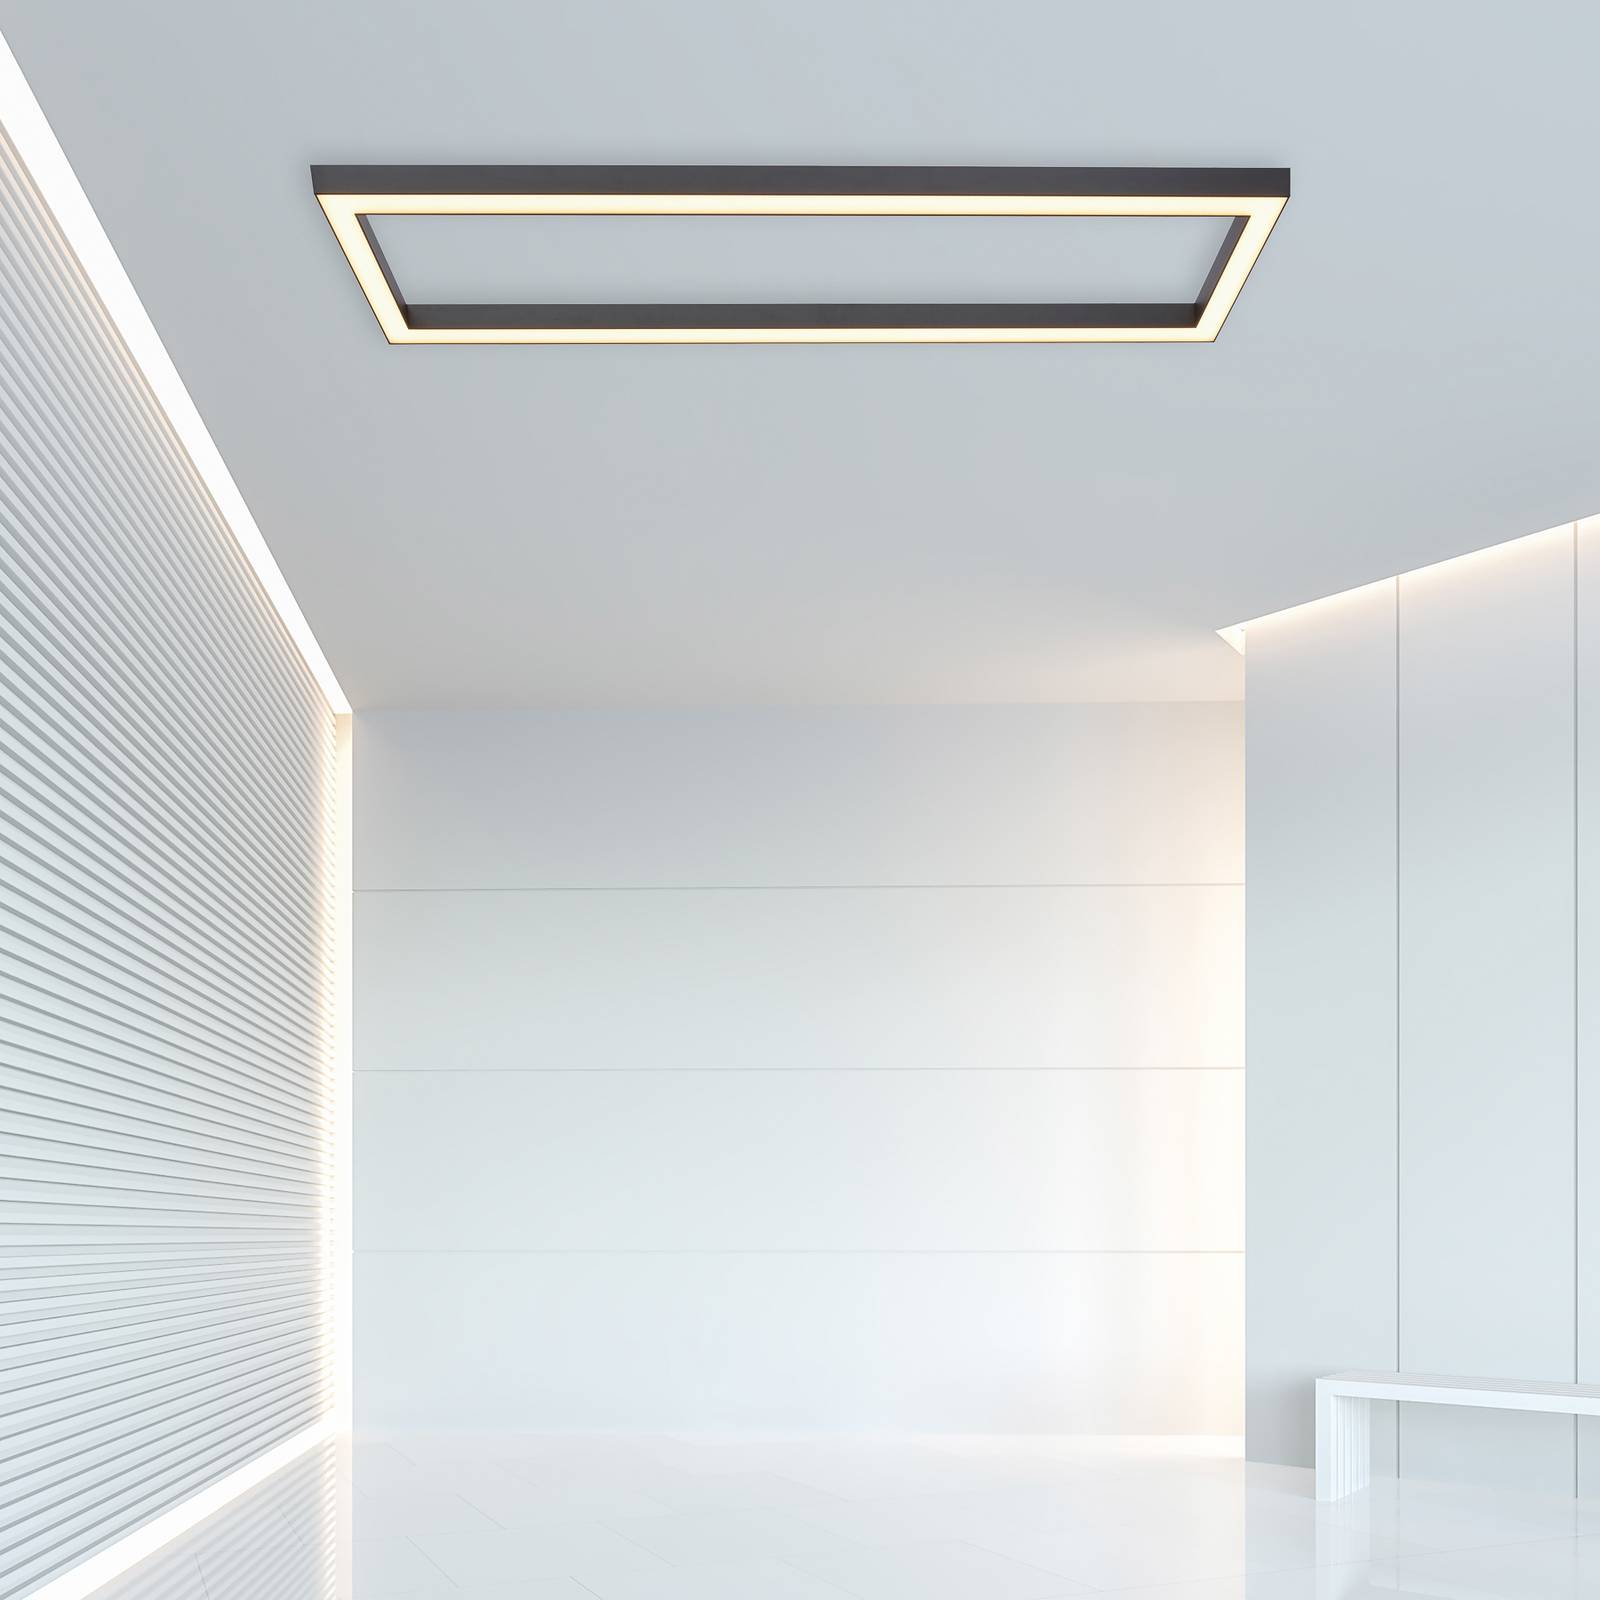 Image of PURE Lines plafonnier LED, angulaire, anthracite 4012248357941